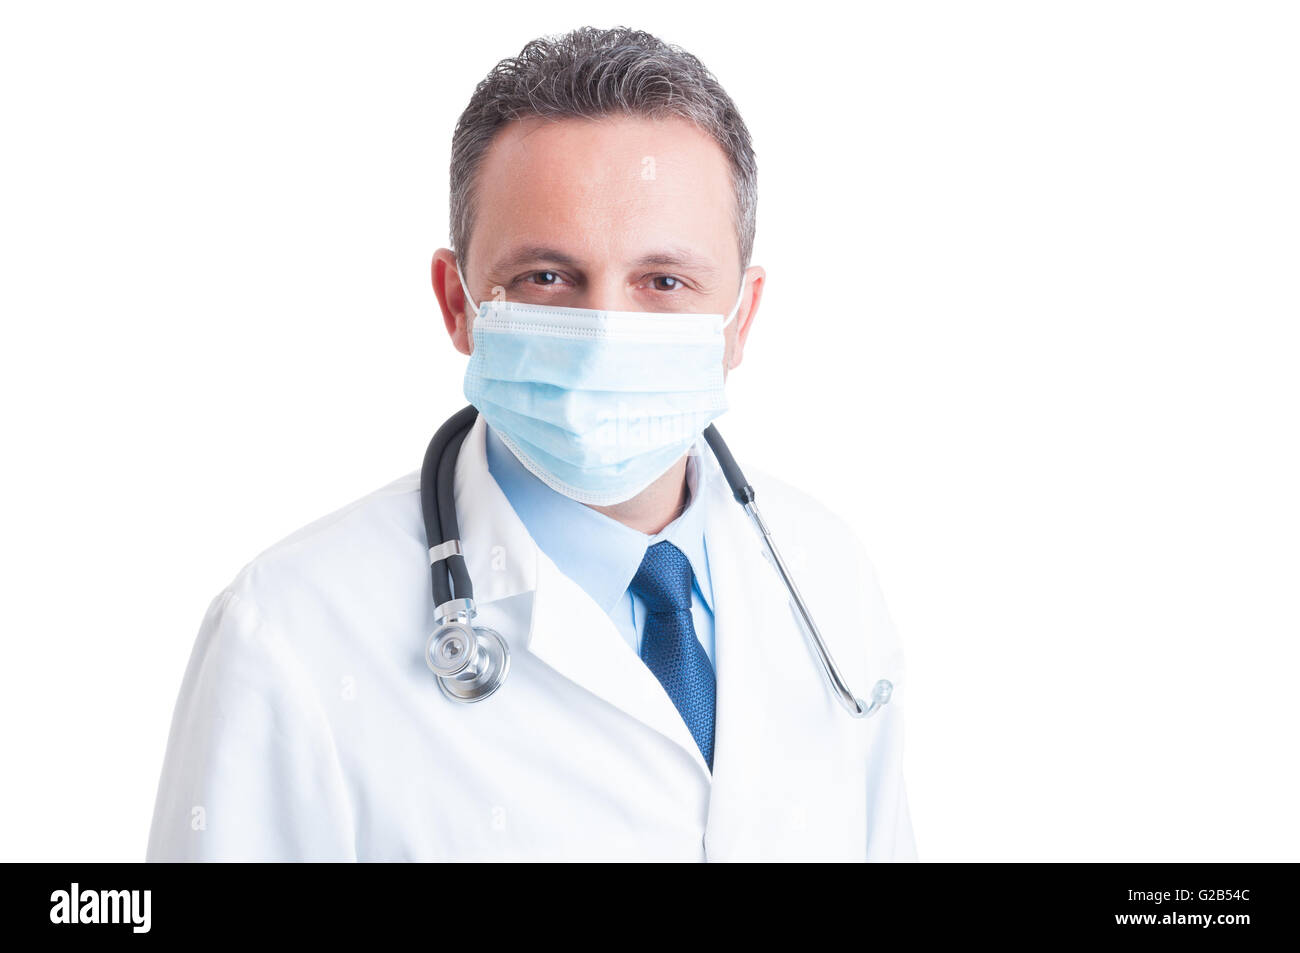 Potrait of handsome doctor wearing surgical protective mask isolated on white background Stock Photo